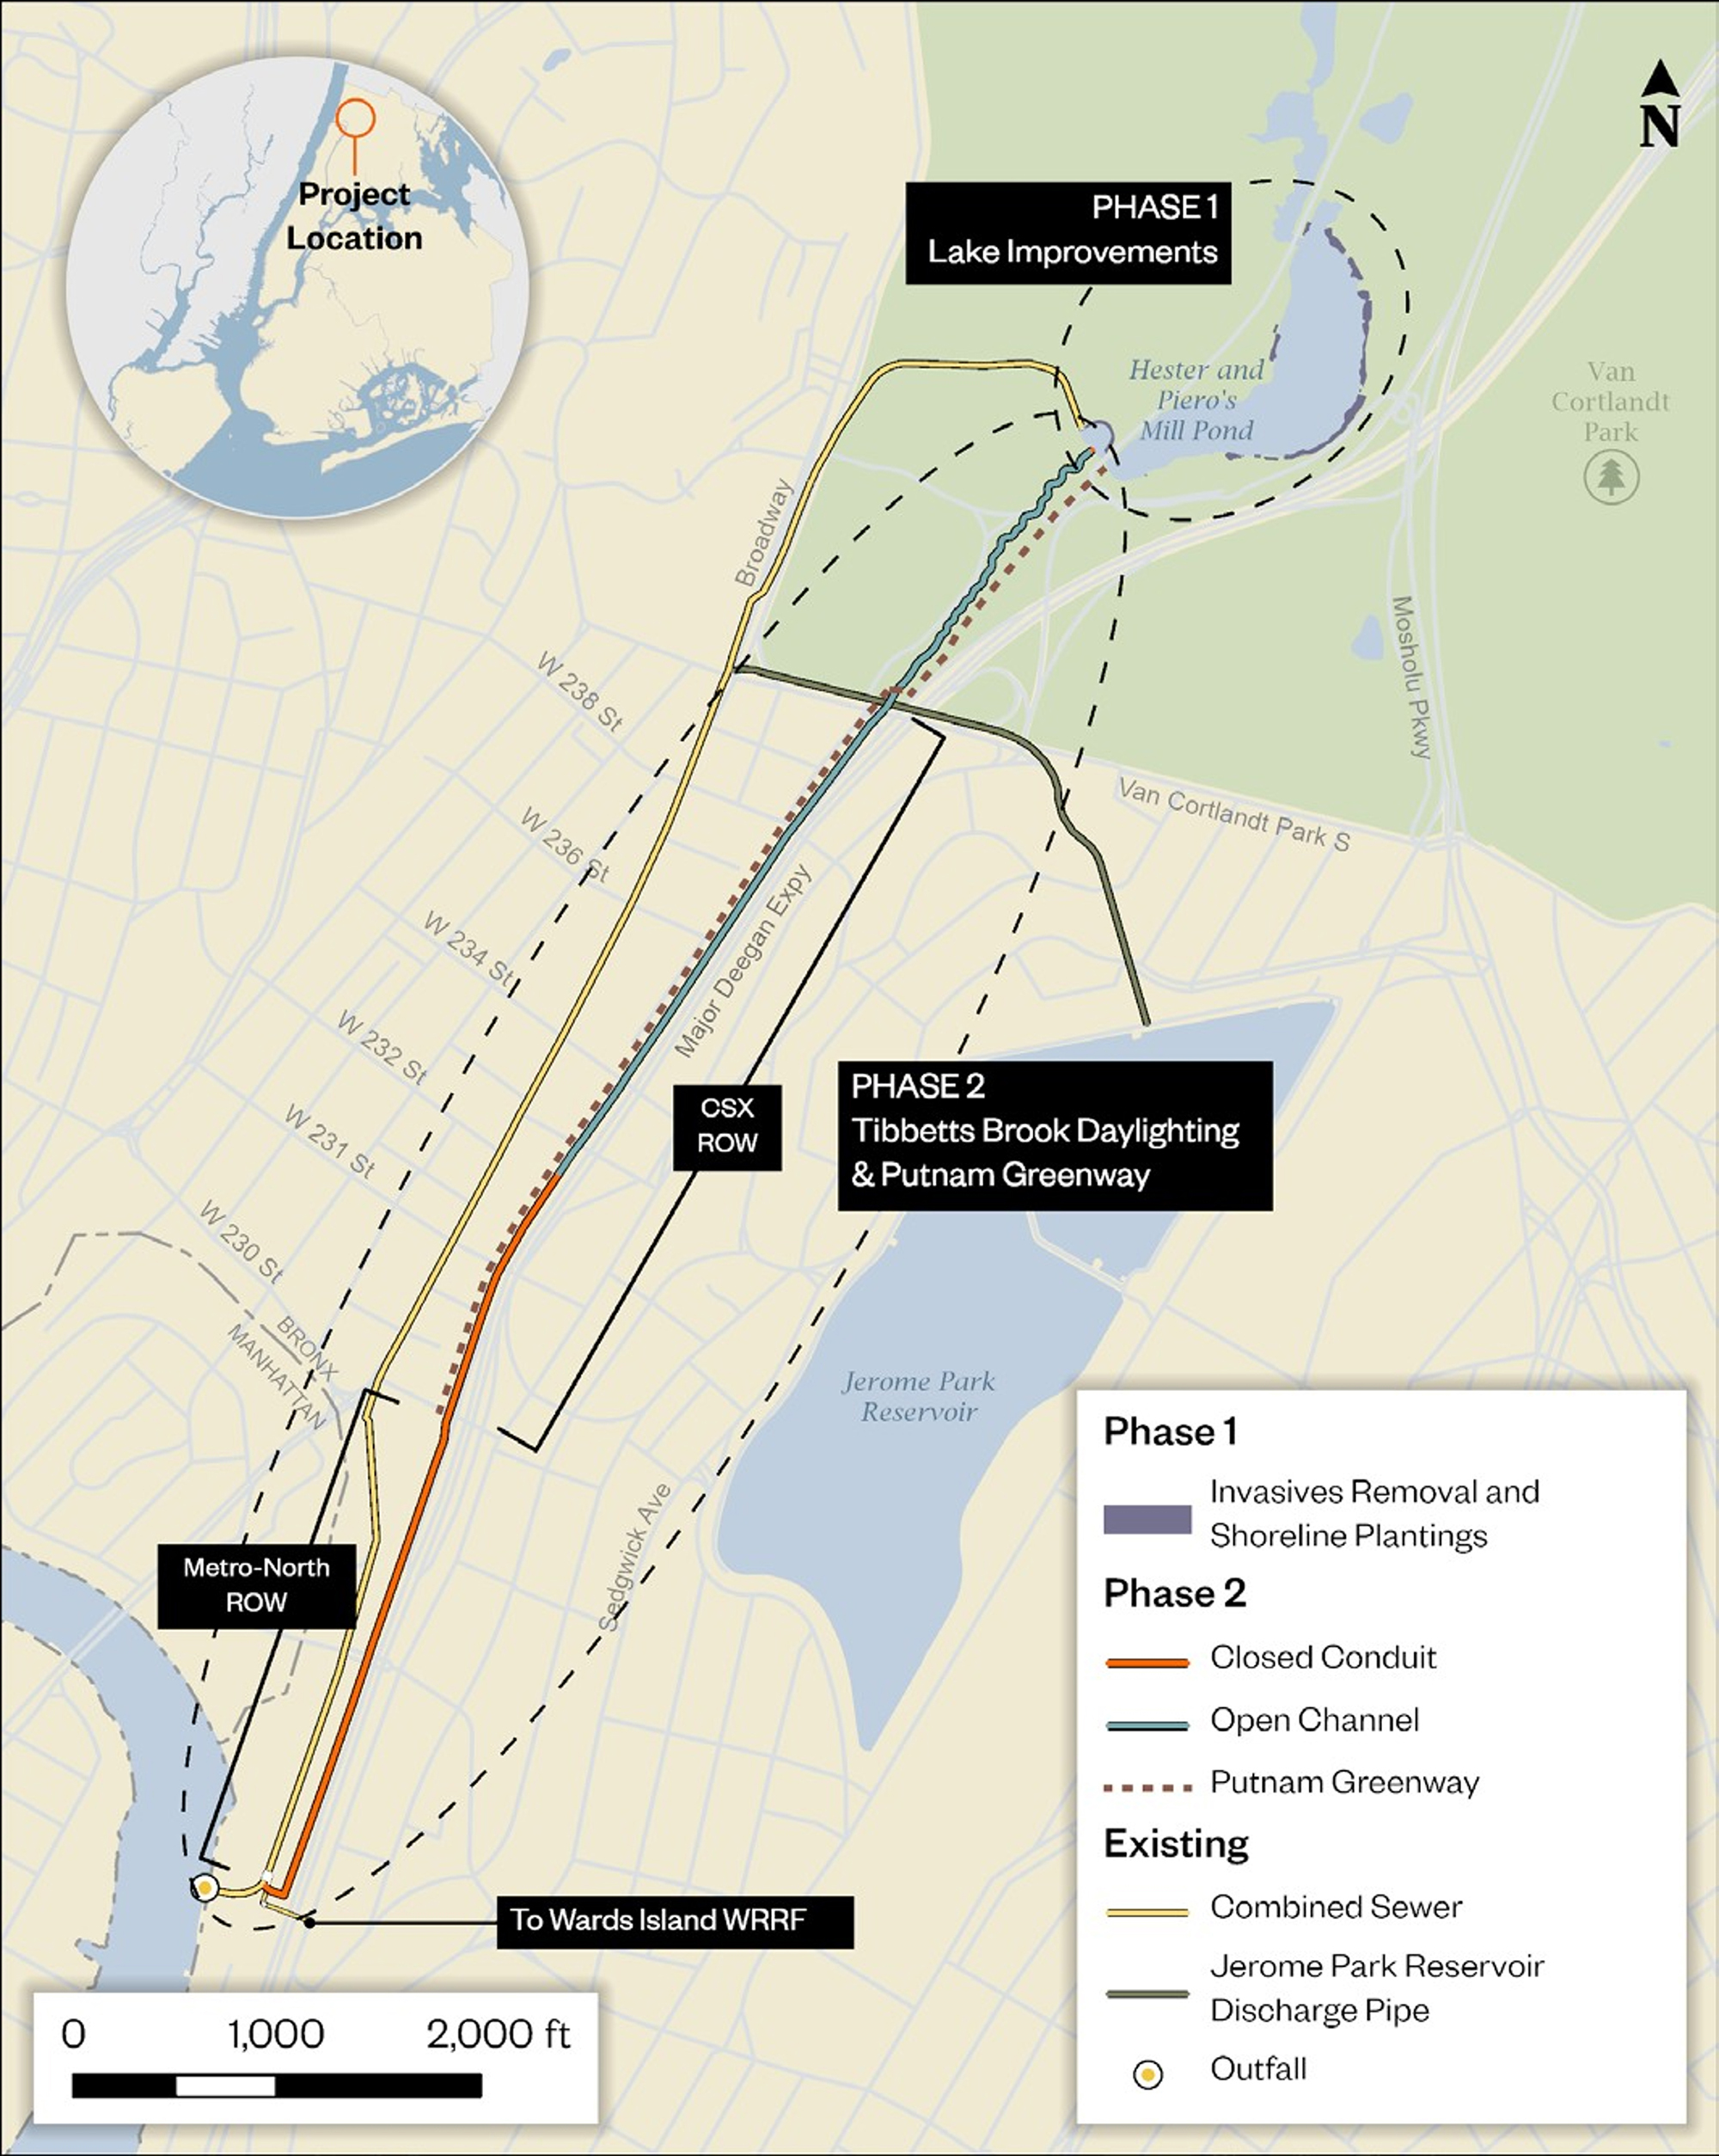 Project map (Image courtesy of the New York City Department of Environmental Protection)